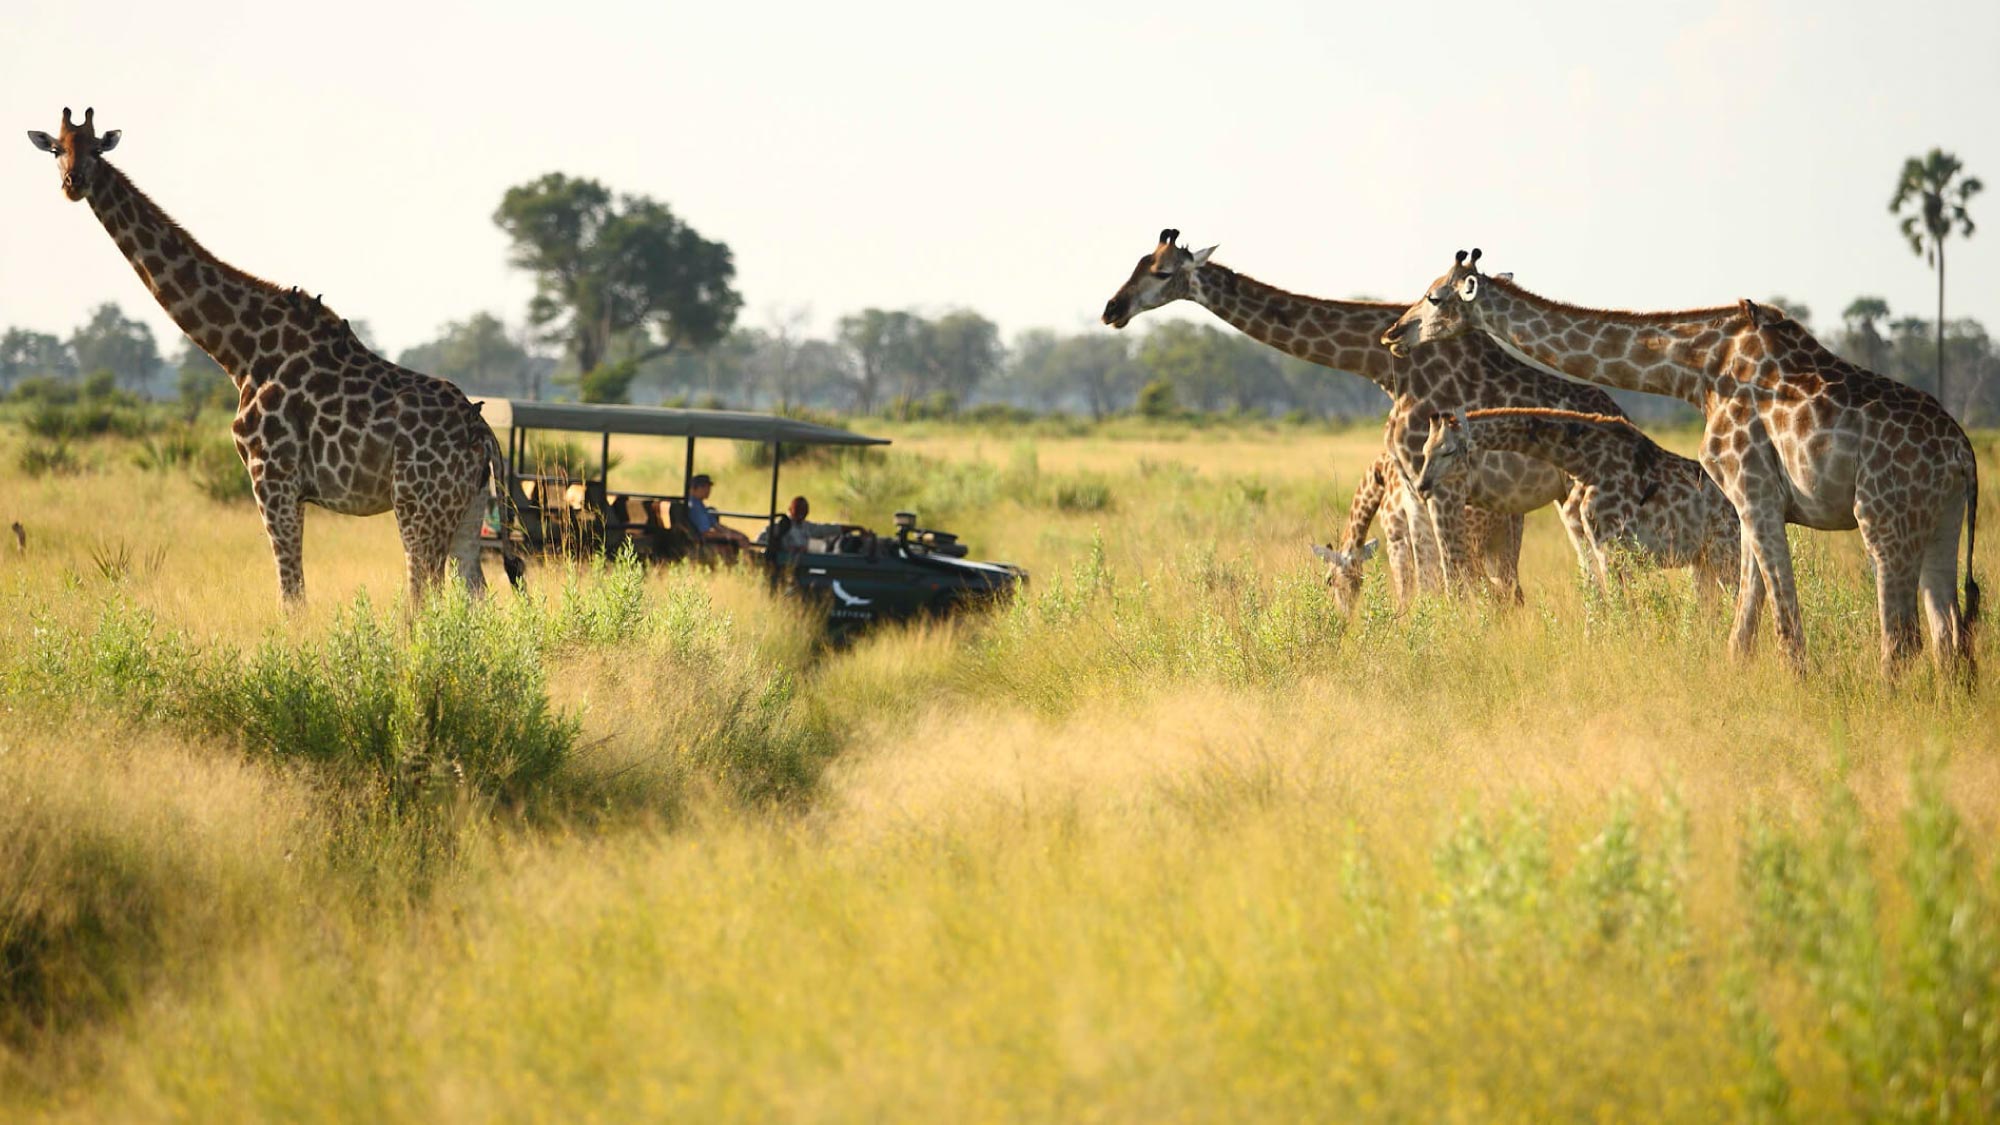 Experience a thrilling safari in the Okavango Delta, where open 4x4 vehicles provide close encounters with Africa's diverse wildlife, including elephants, lions, and hippos in a stunning wetland landscape.